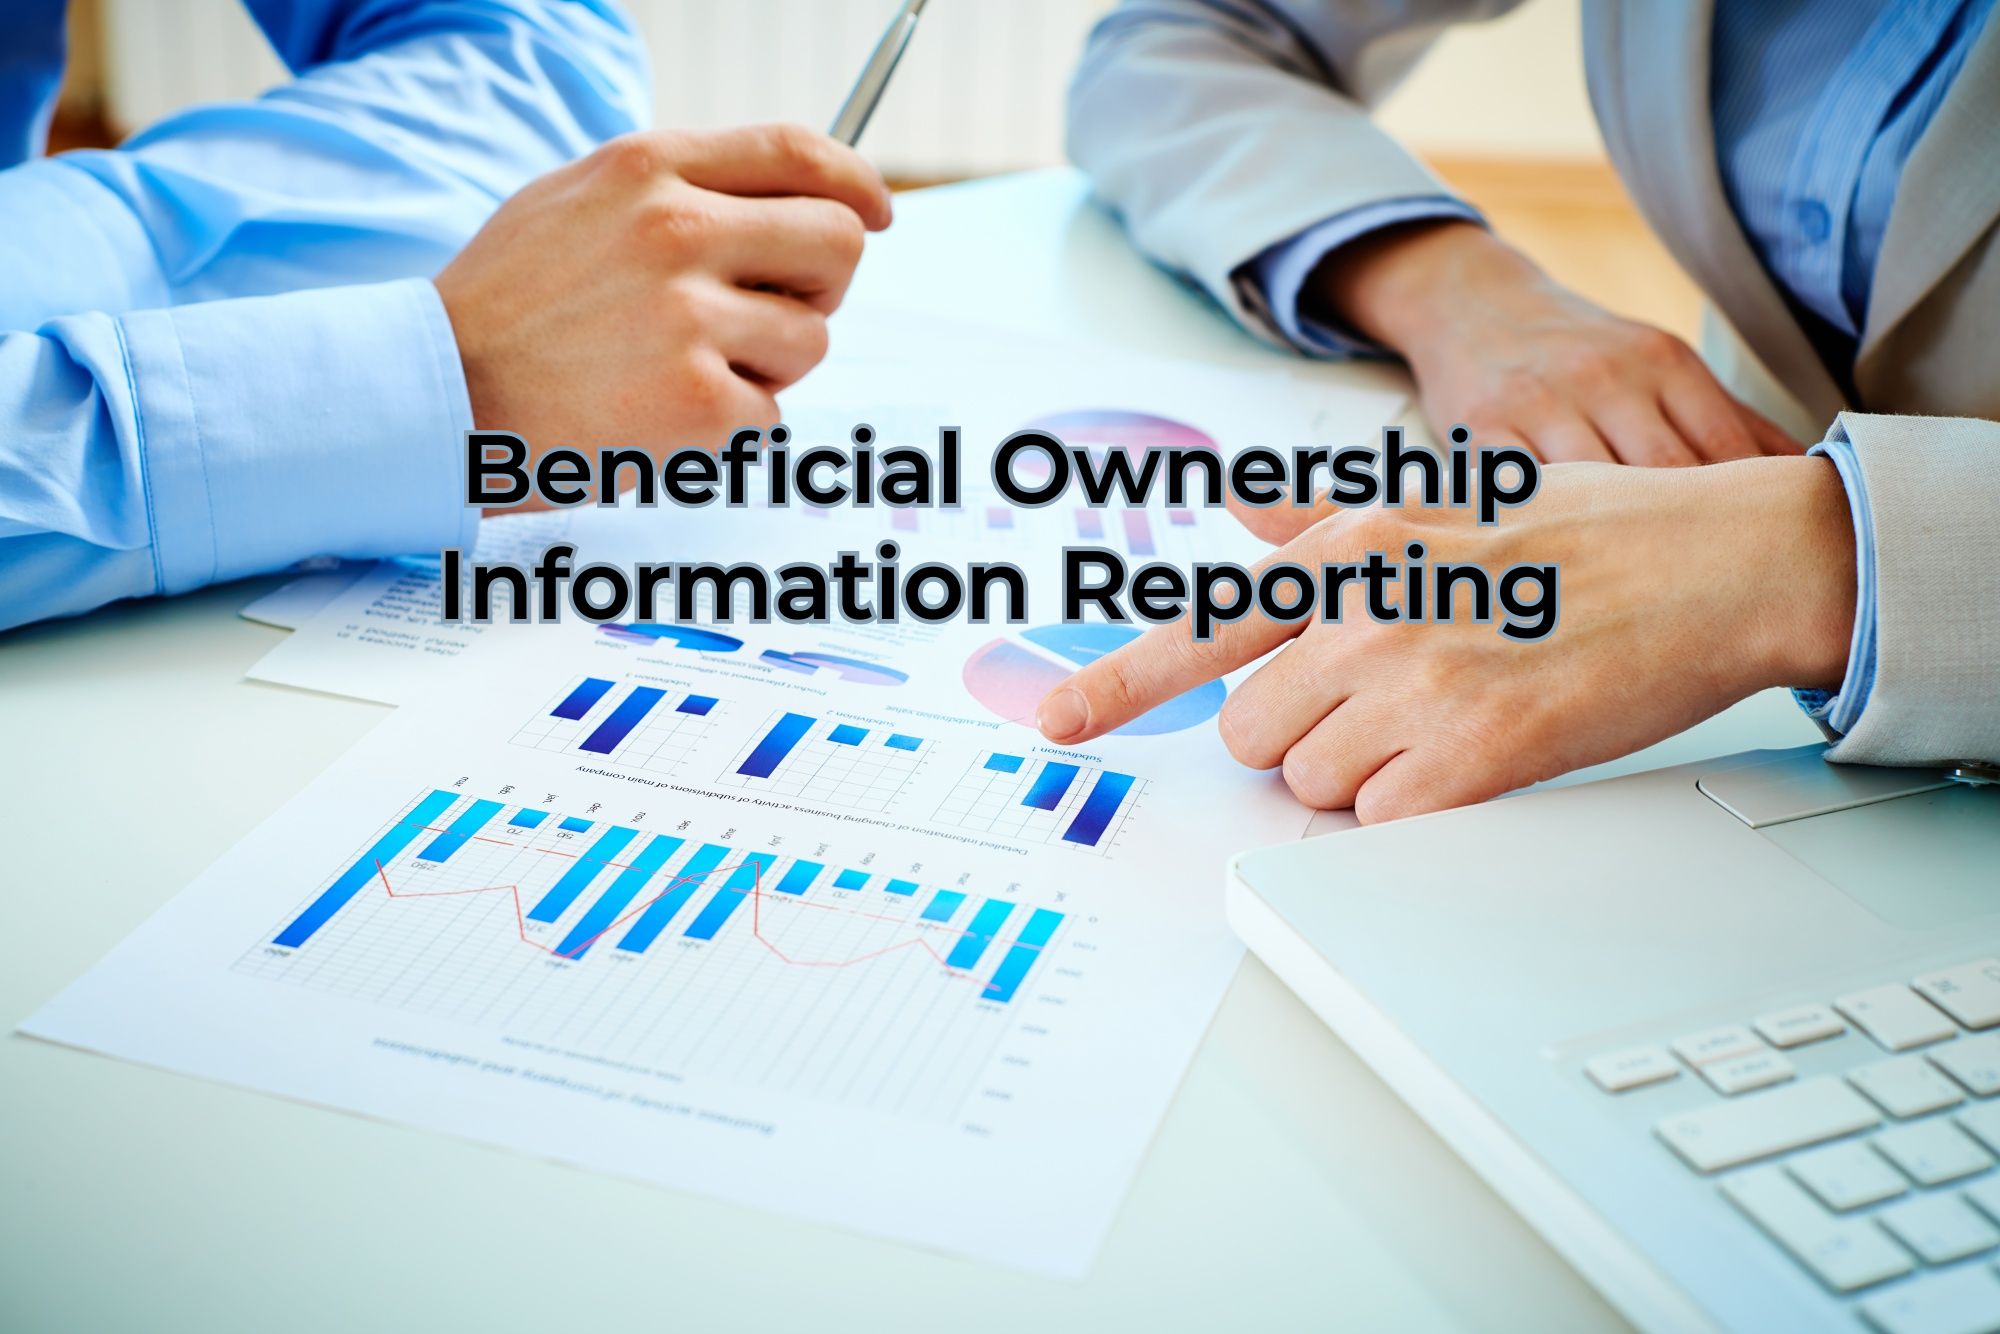 Beneficial Ownership Information Reporting Requirements